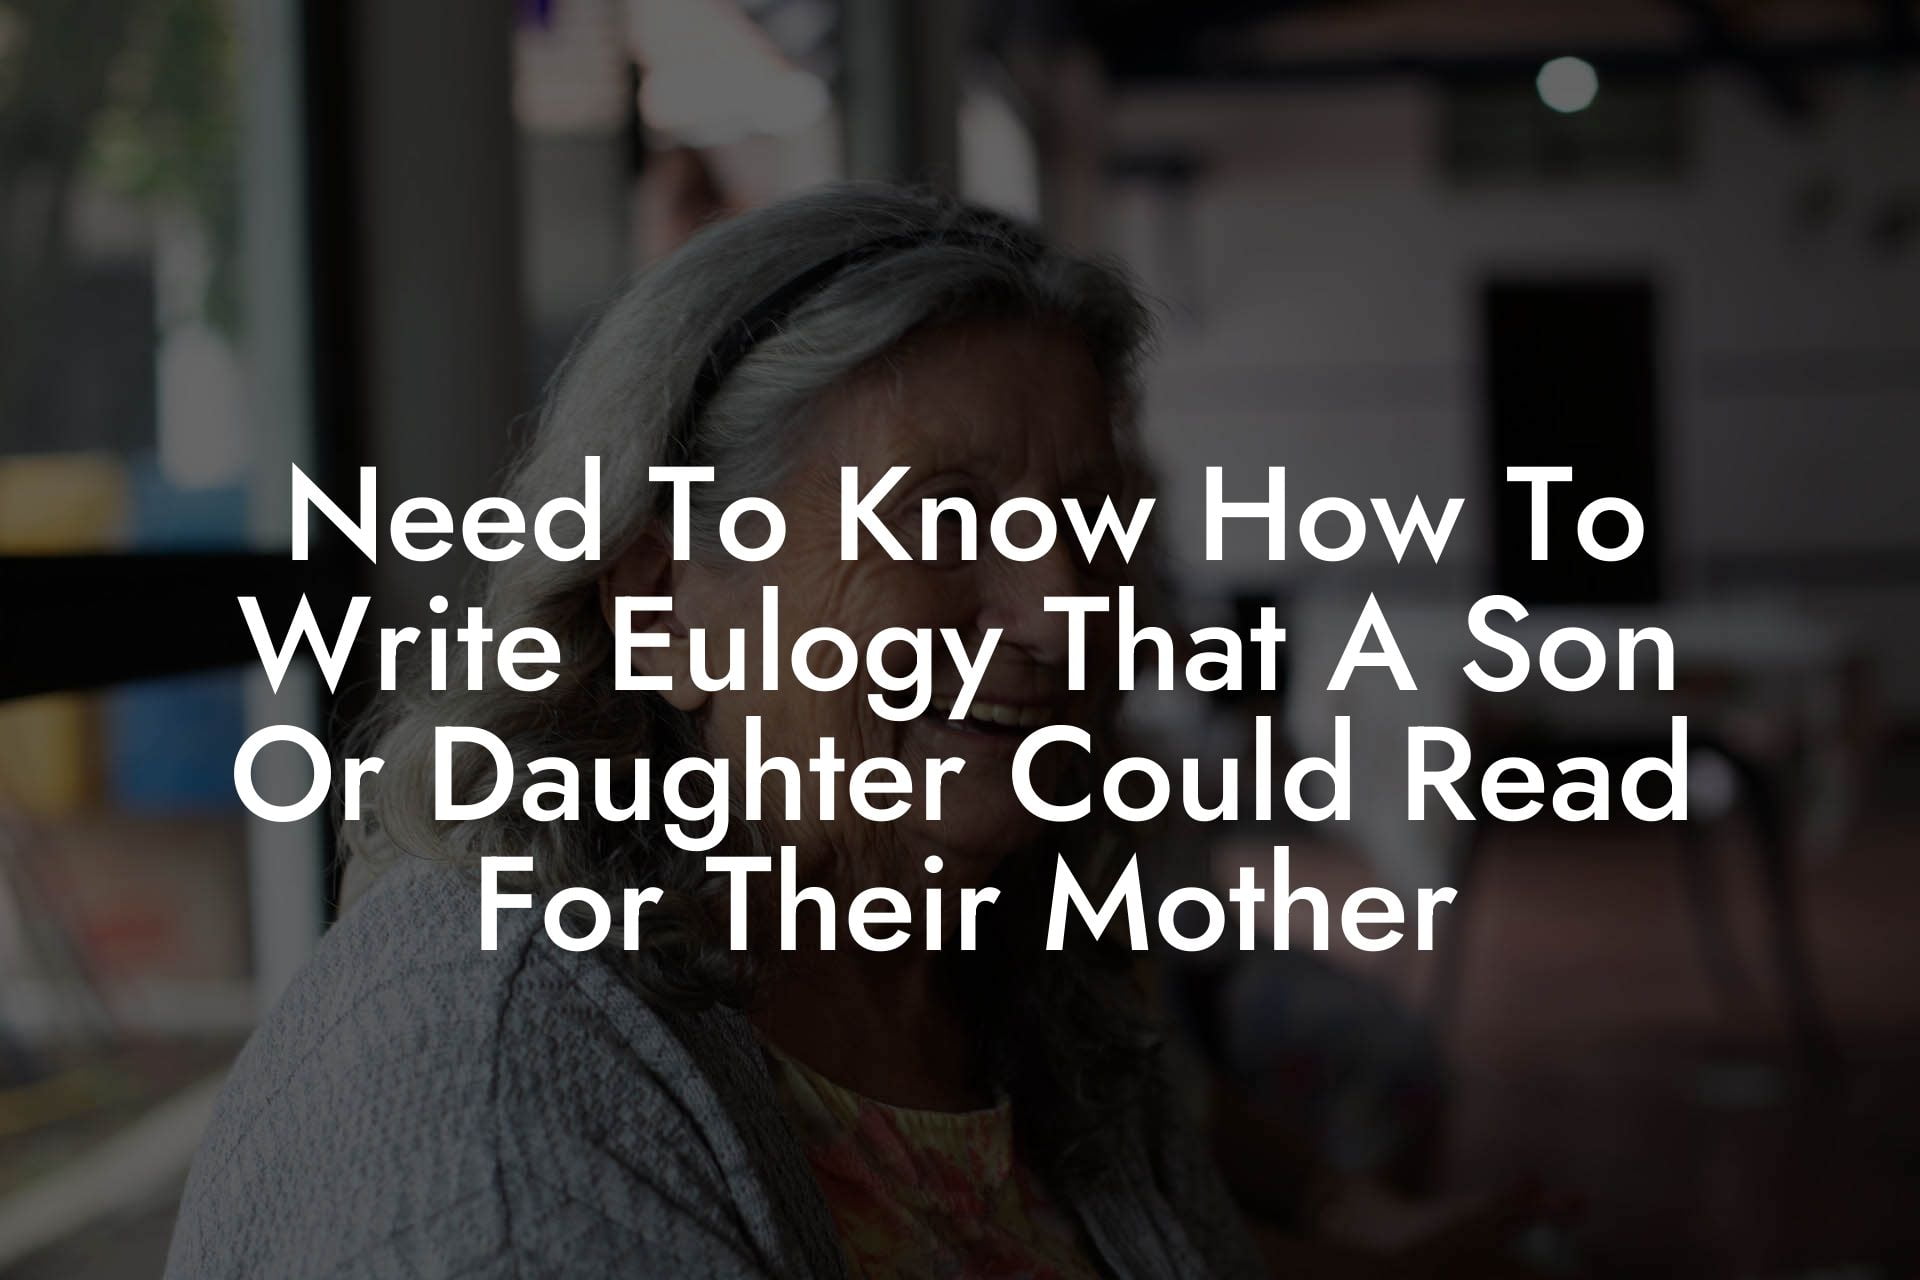 Need To Know How To Write Eulogy That A Son Or Daughter Could Read For Their Mother